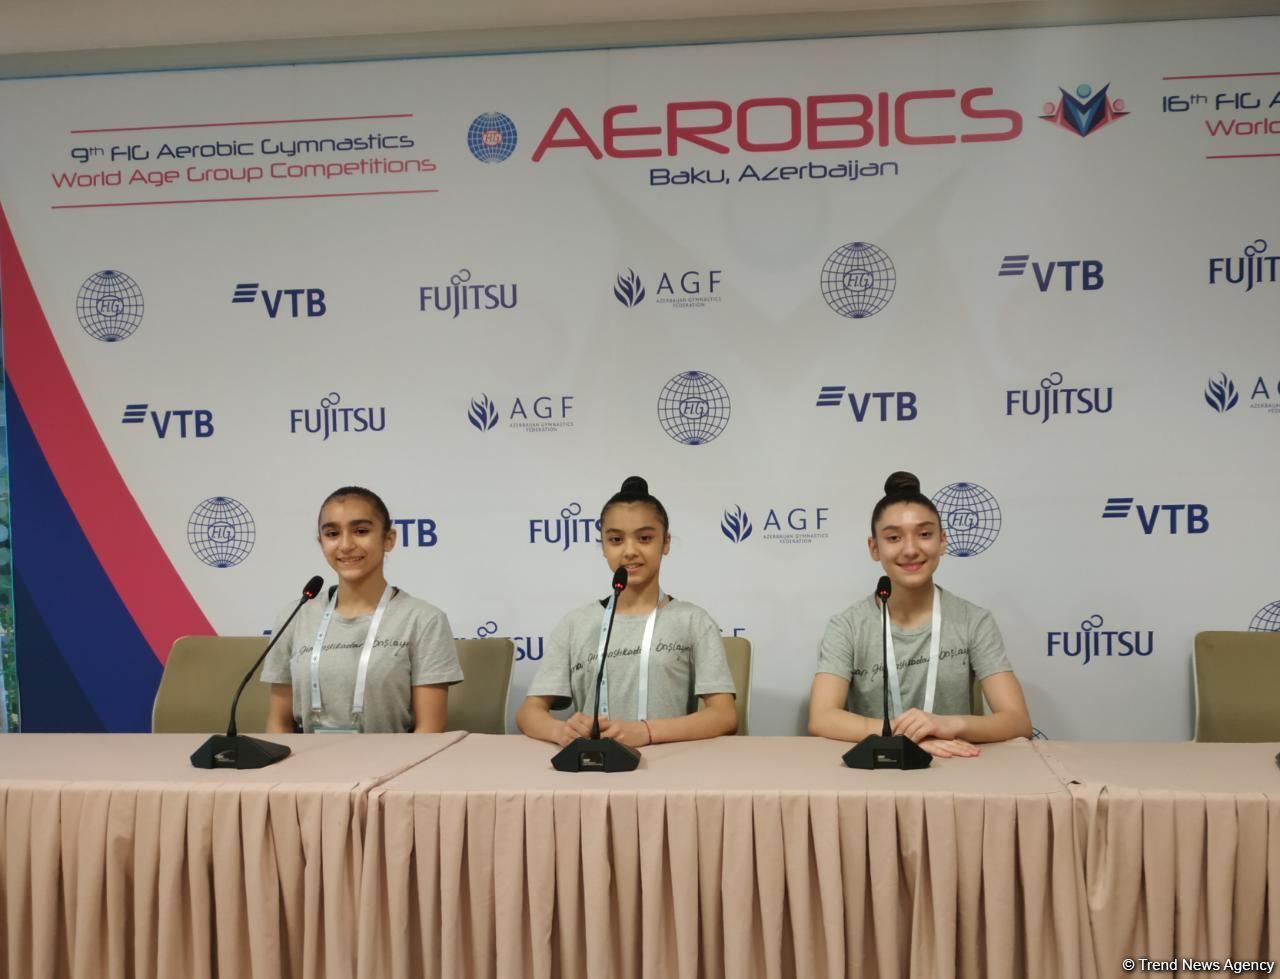 We are pleased to reach finals of Aerobic Gymnastics World Age Group Competition - Azerbaijani athletes